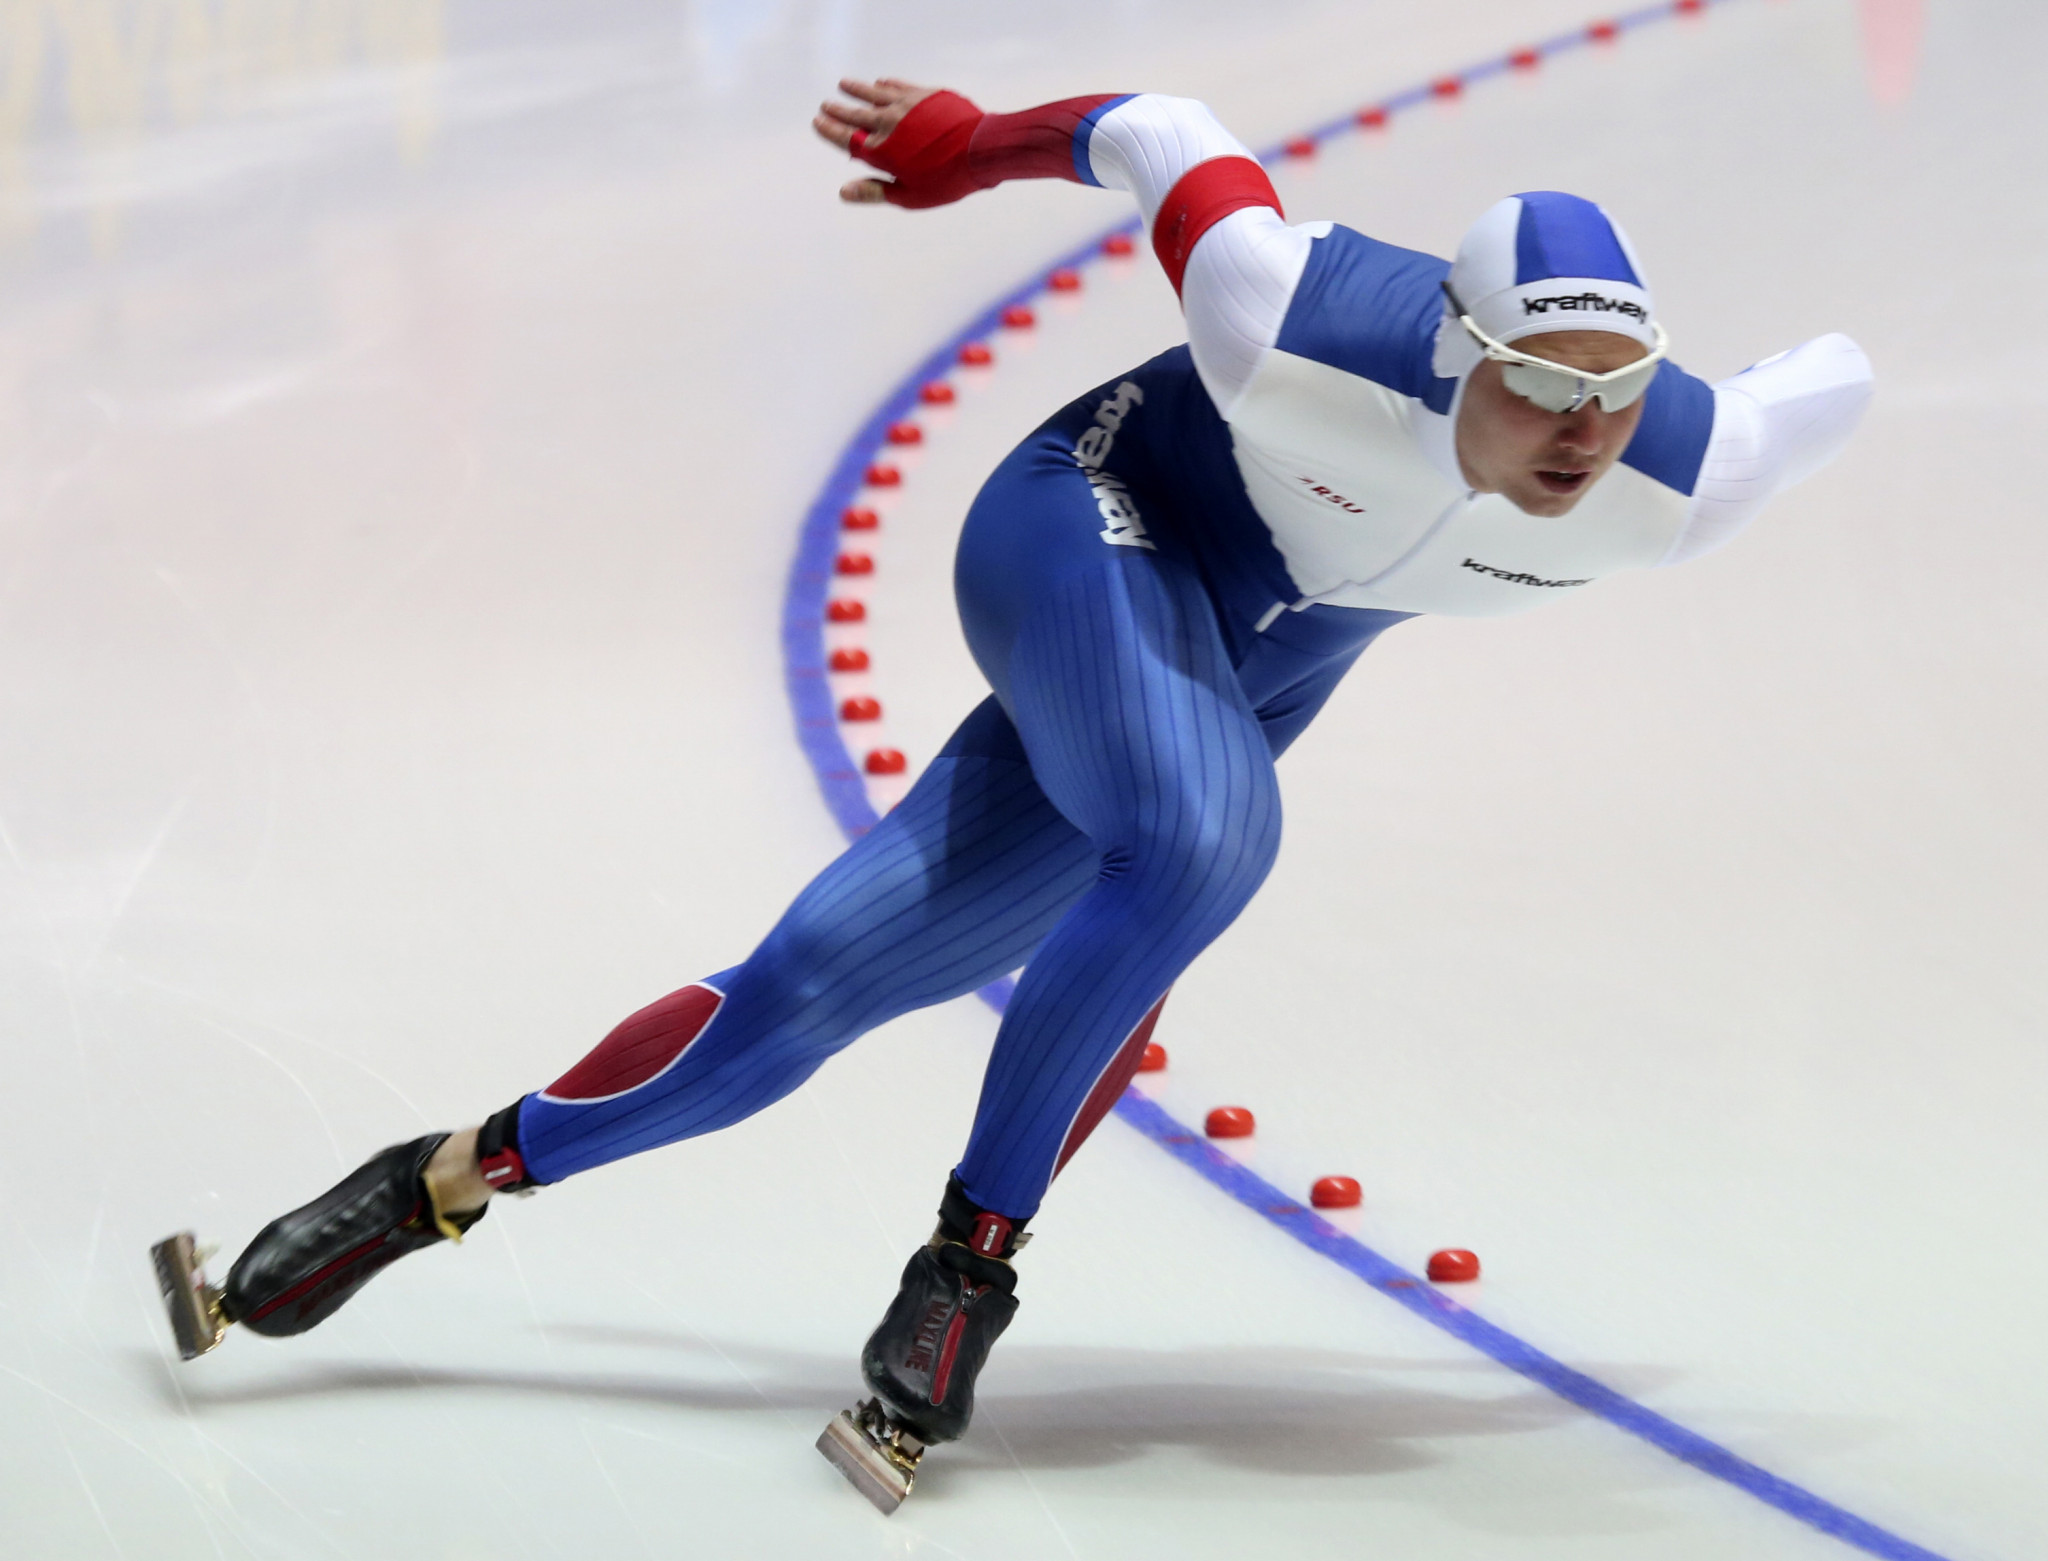 Russia's Pavel Kulizhnikov won the second 500m race at the ISU Speed Skating World Cup in Hamar, having won the same event yesterday ©Getty Images